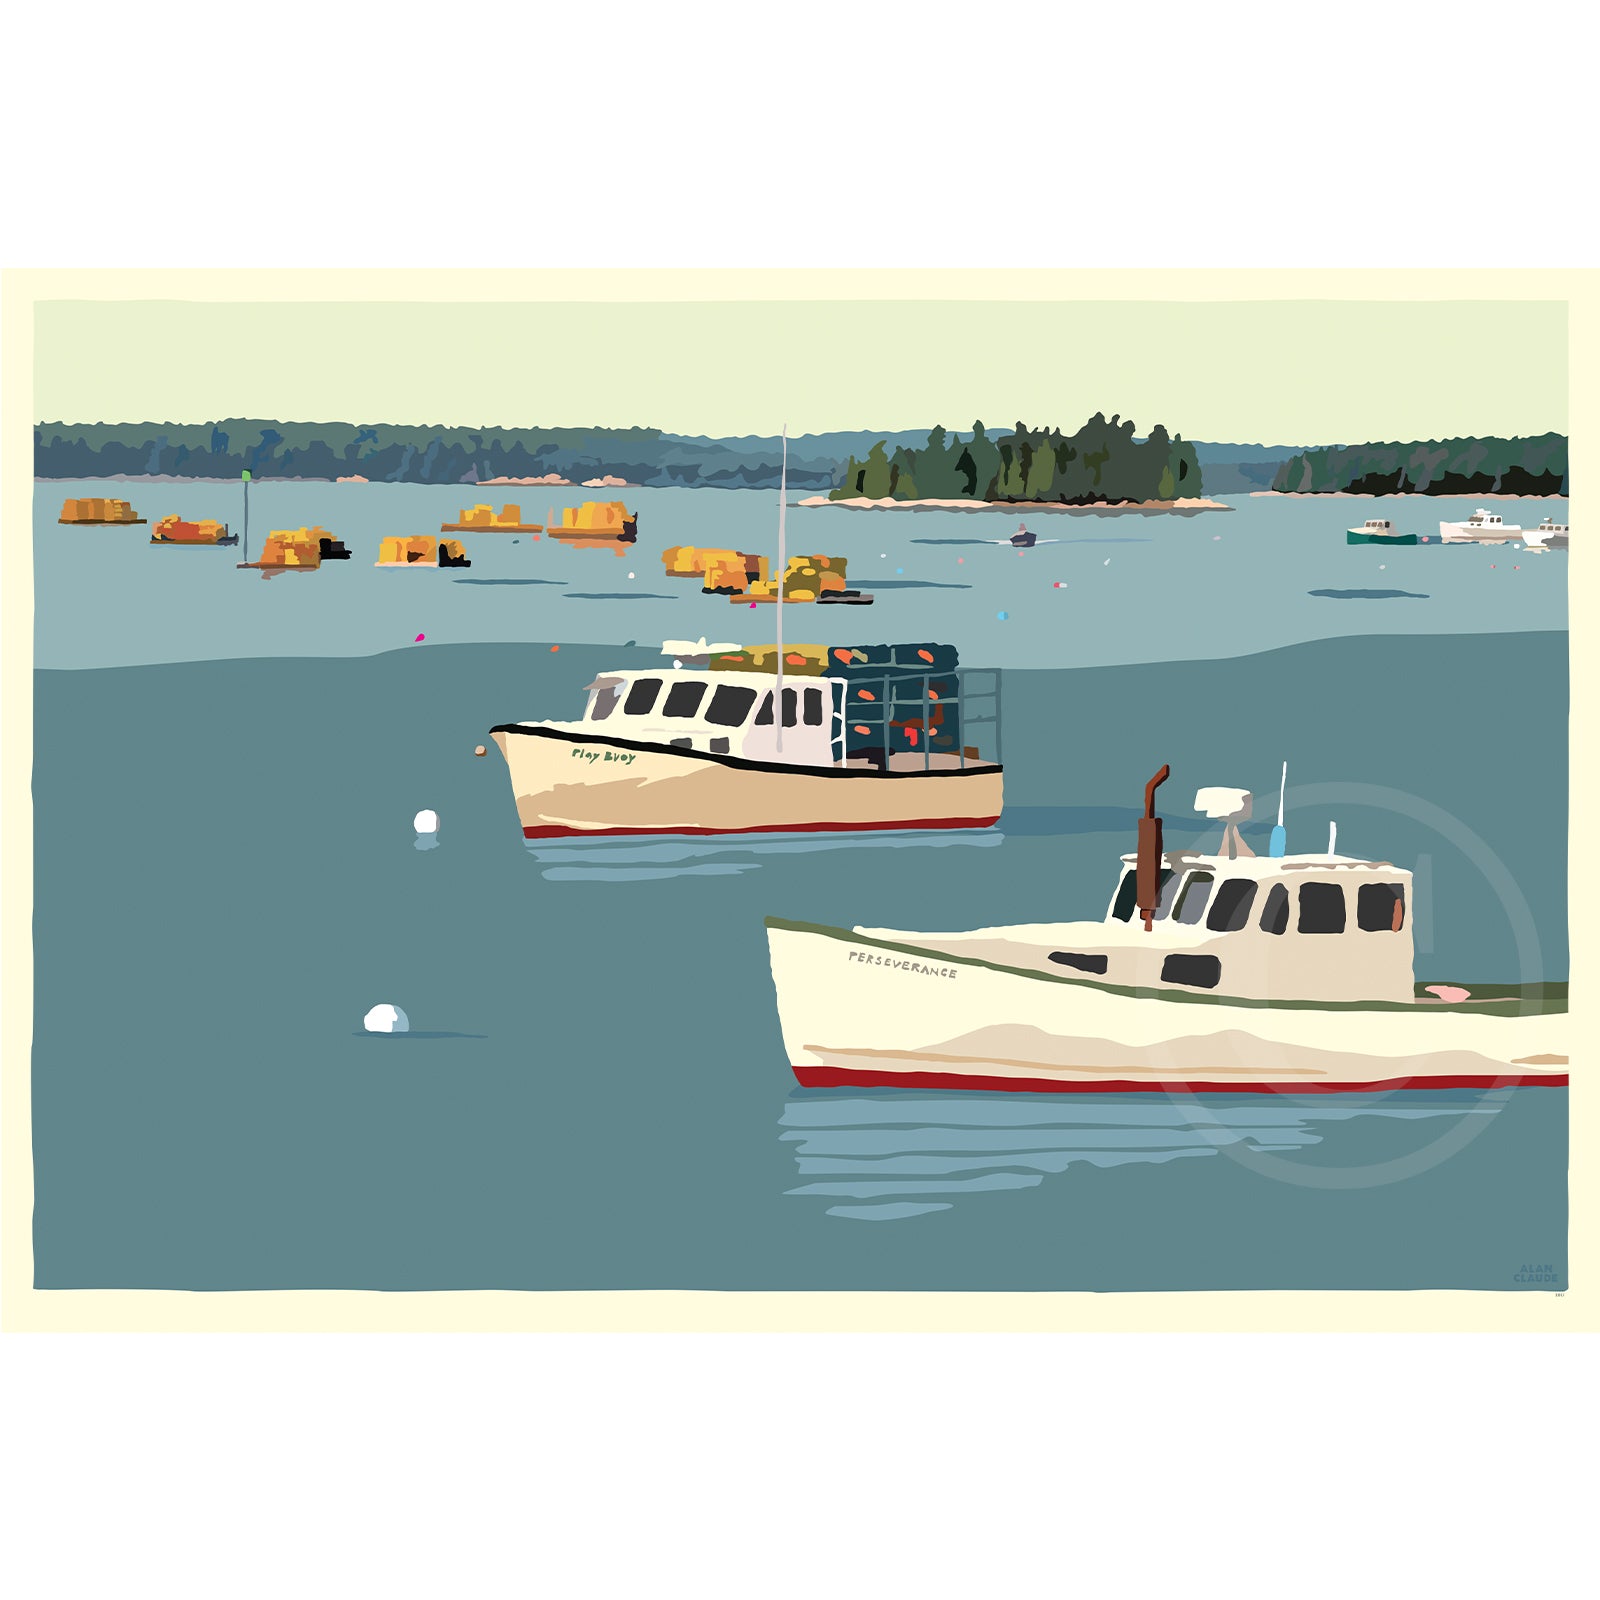 Lobster Boats in Friendship Art Print 24" x 36" Wall Poster By Alan Claude - Maine